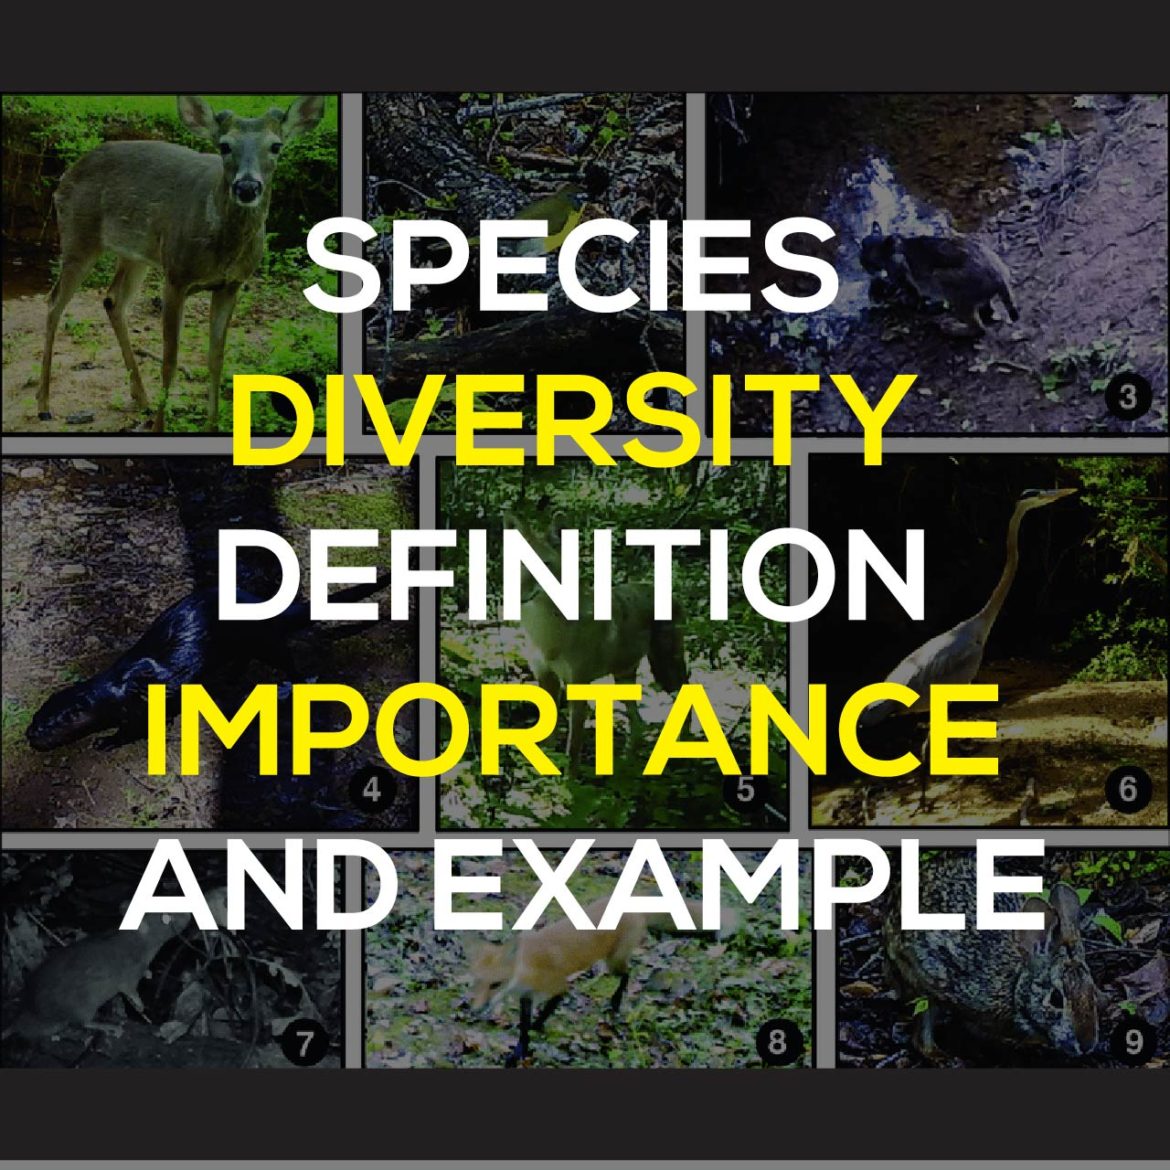 essay about the species diversity